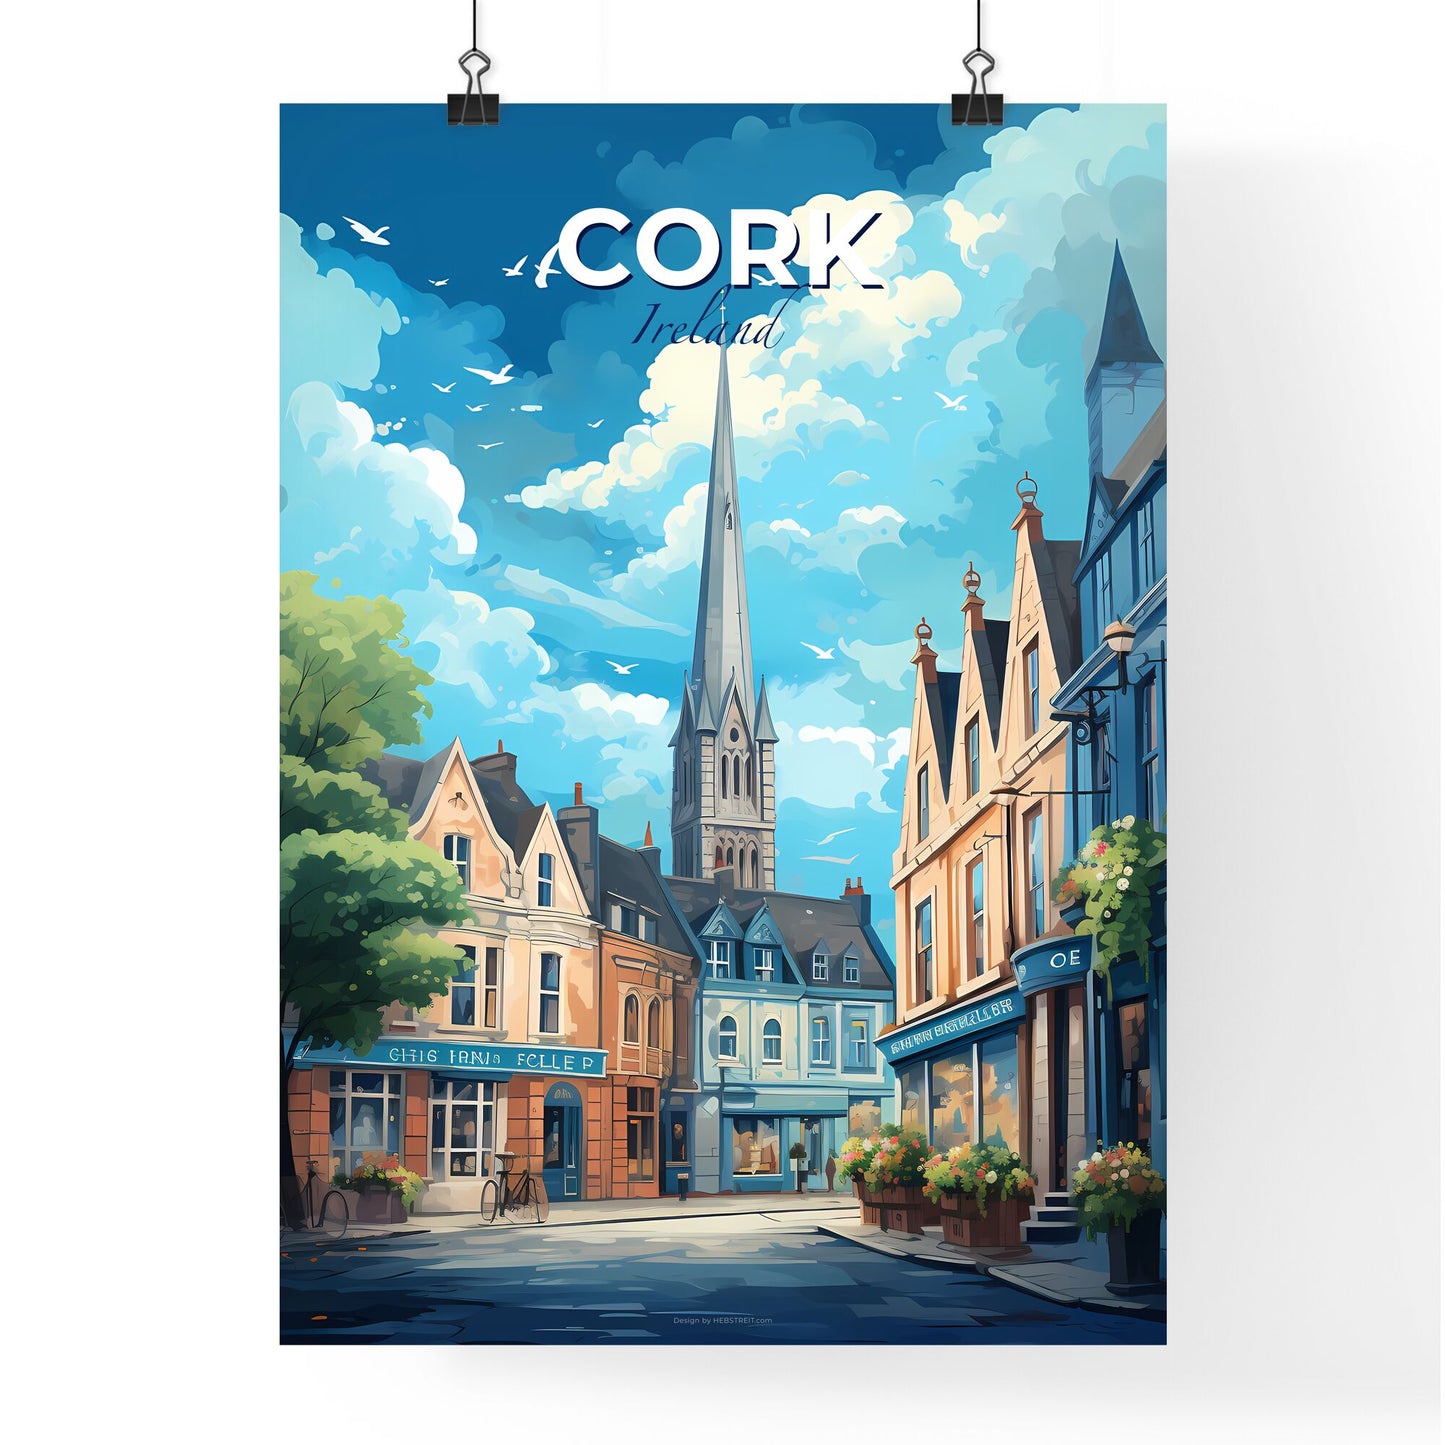 Cork Ireland Skyline - A Street With Buildings And A Tall Tower - Customizable Travel Gift Default Title